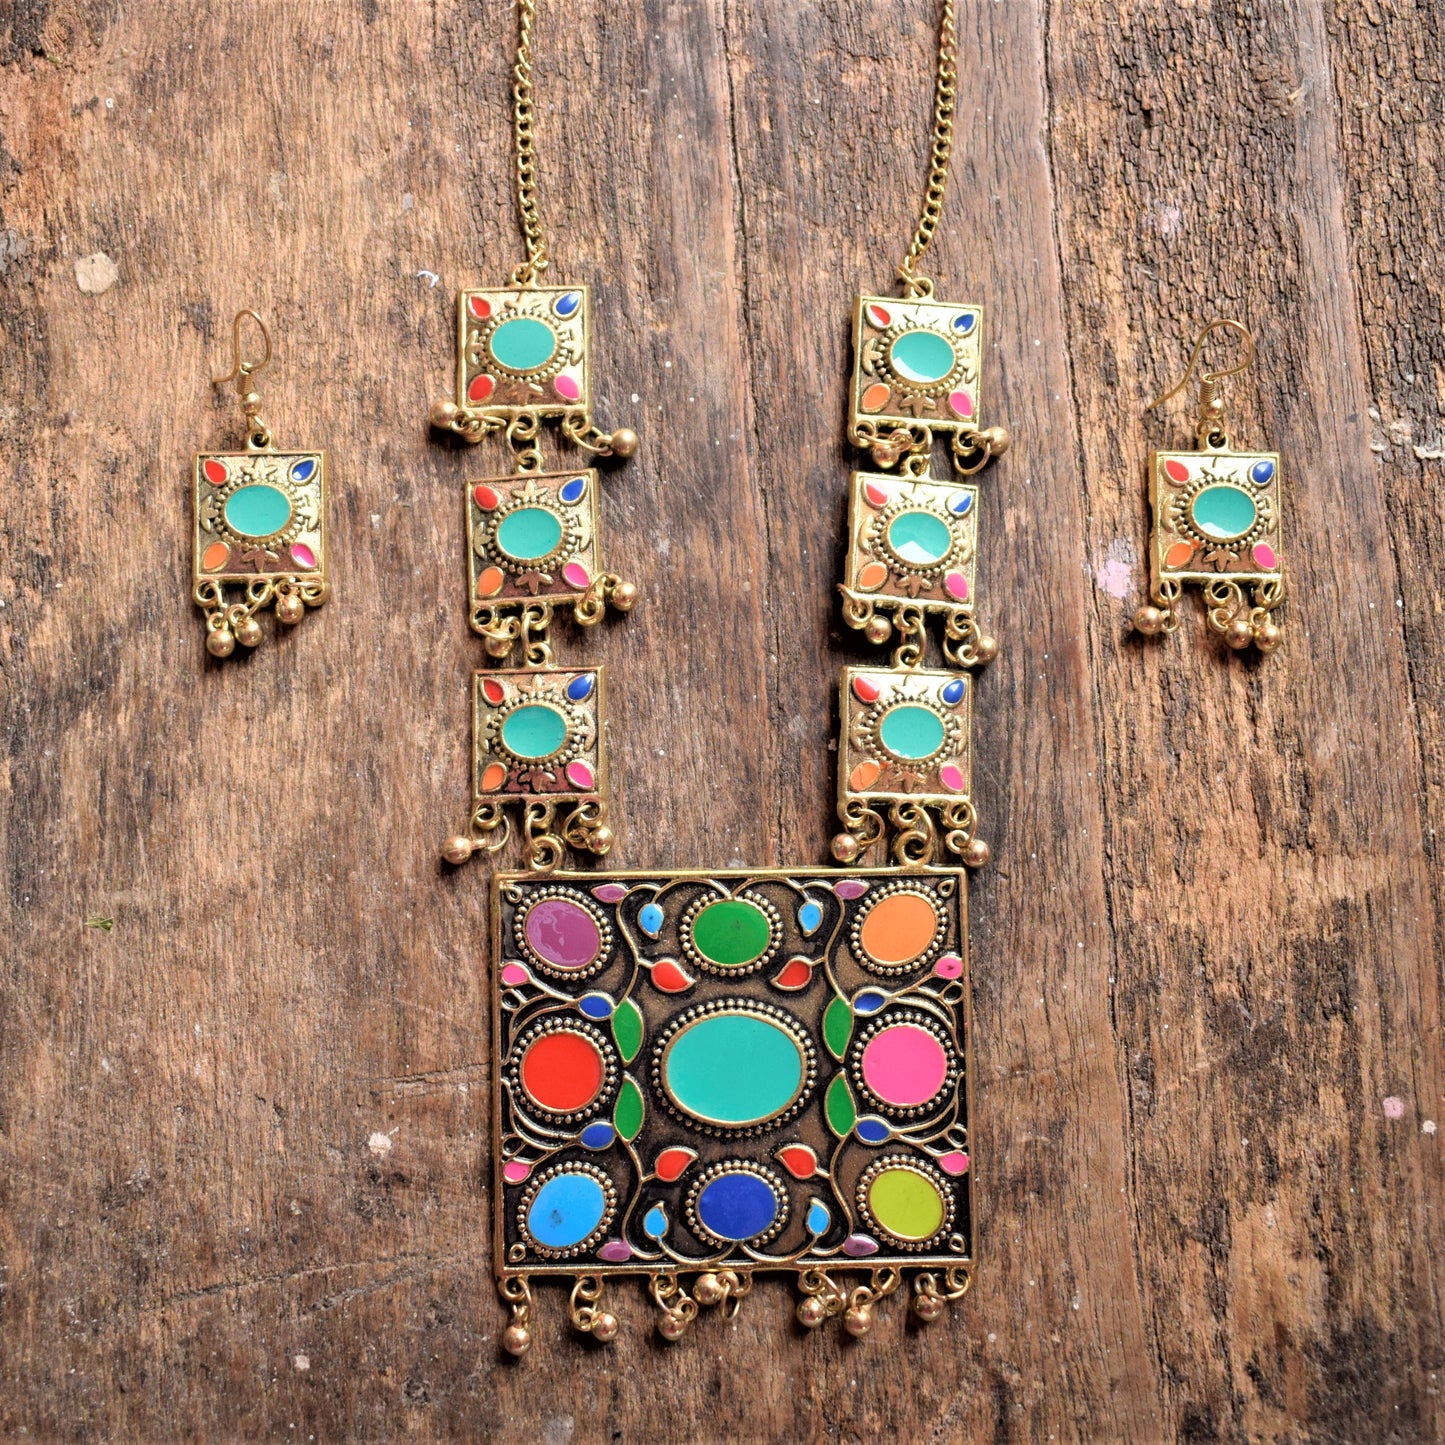 Afghani Square Oxidised Necklace with Earrings - GlitterGleam